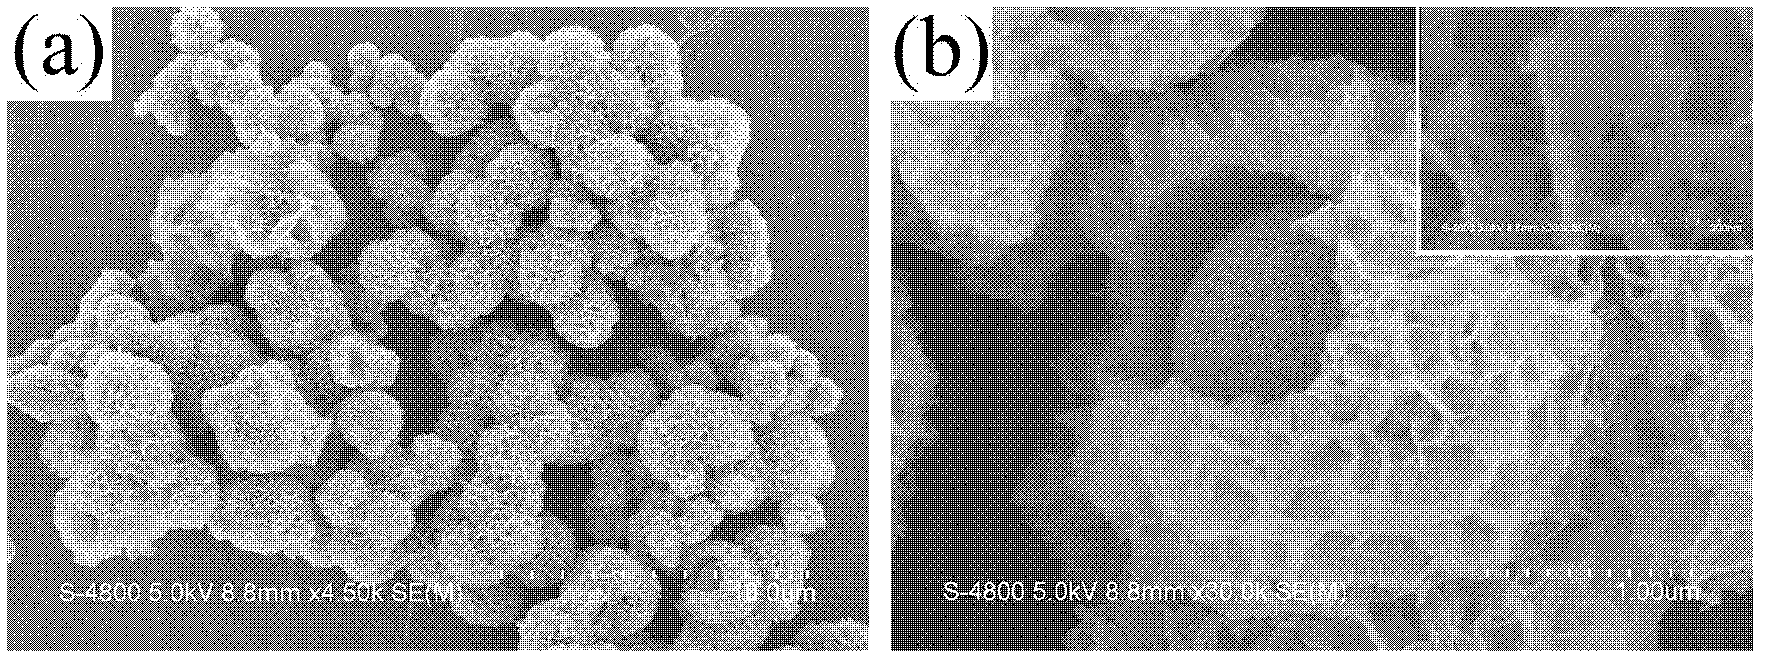 Preparation method and application of Fe3O4-Co3O4 porous magnetic composite material